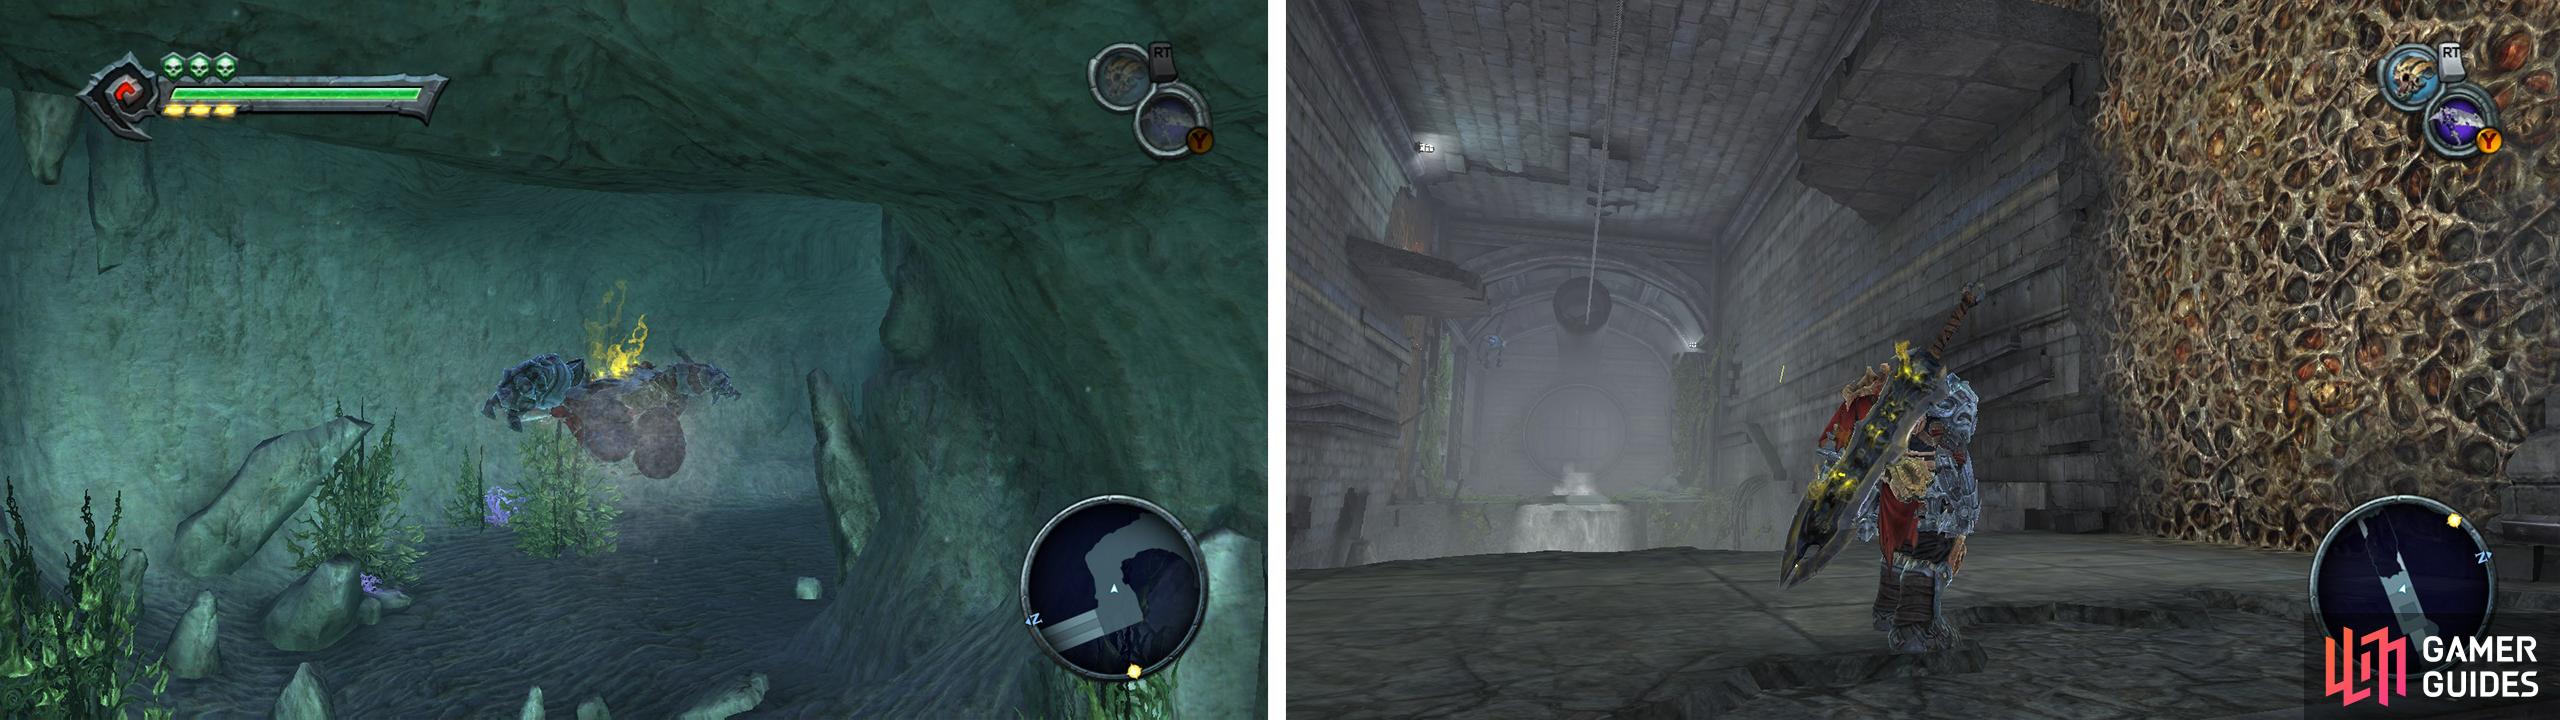 Swim through the tunnel (left) and then use the demonic growth and the rope to cross the chasm (right).